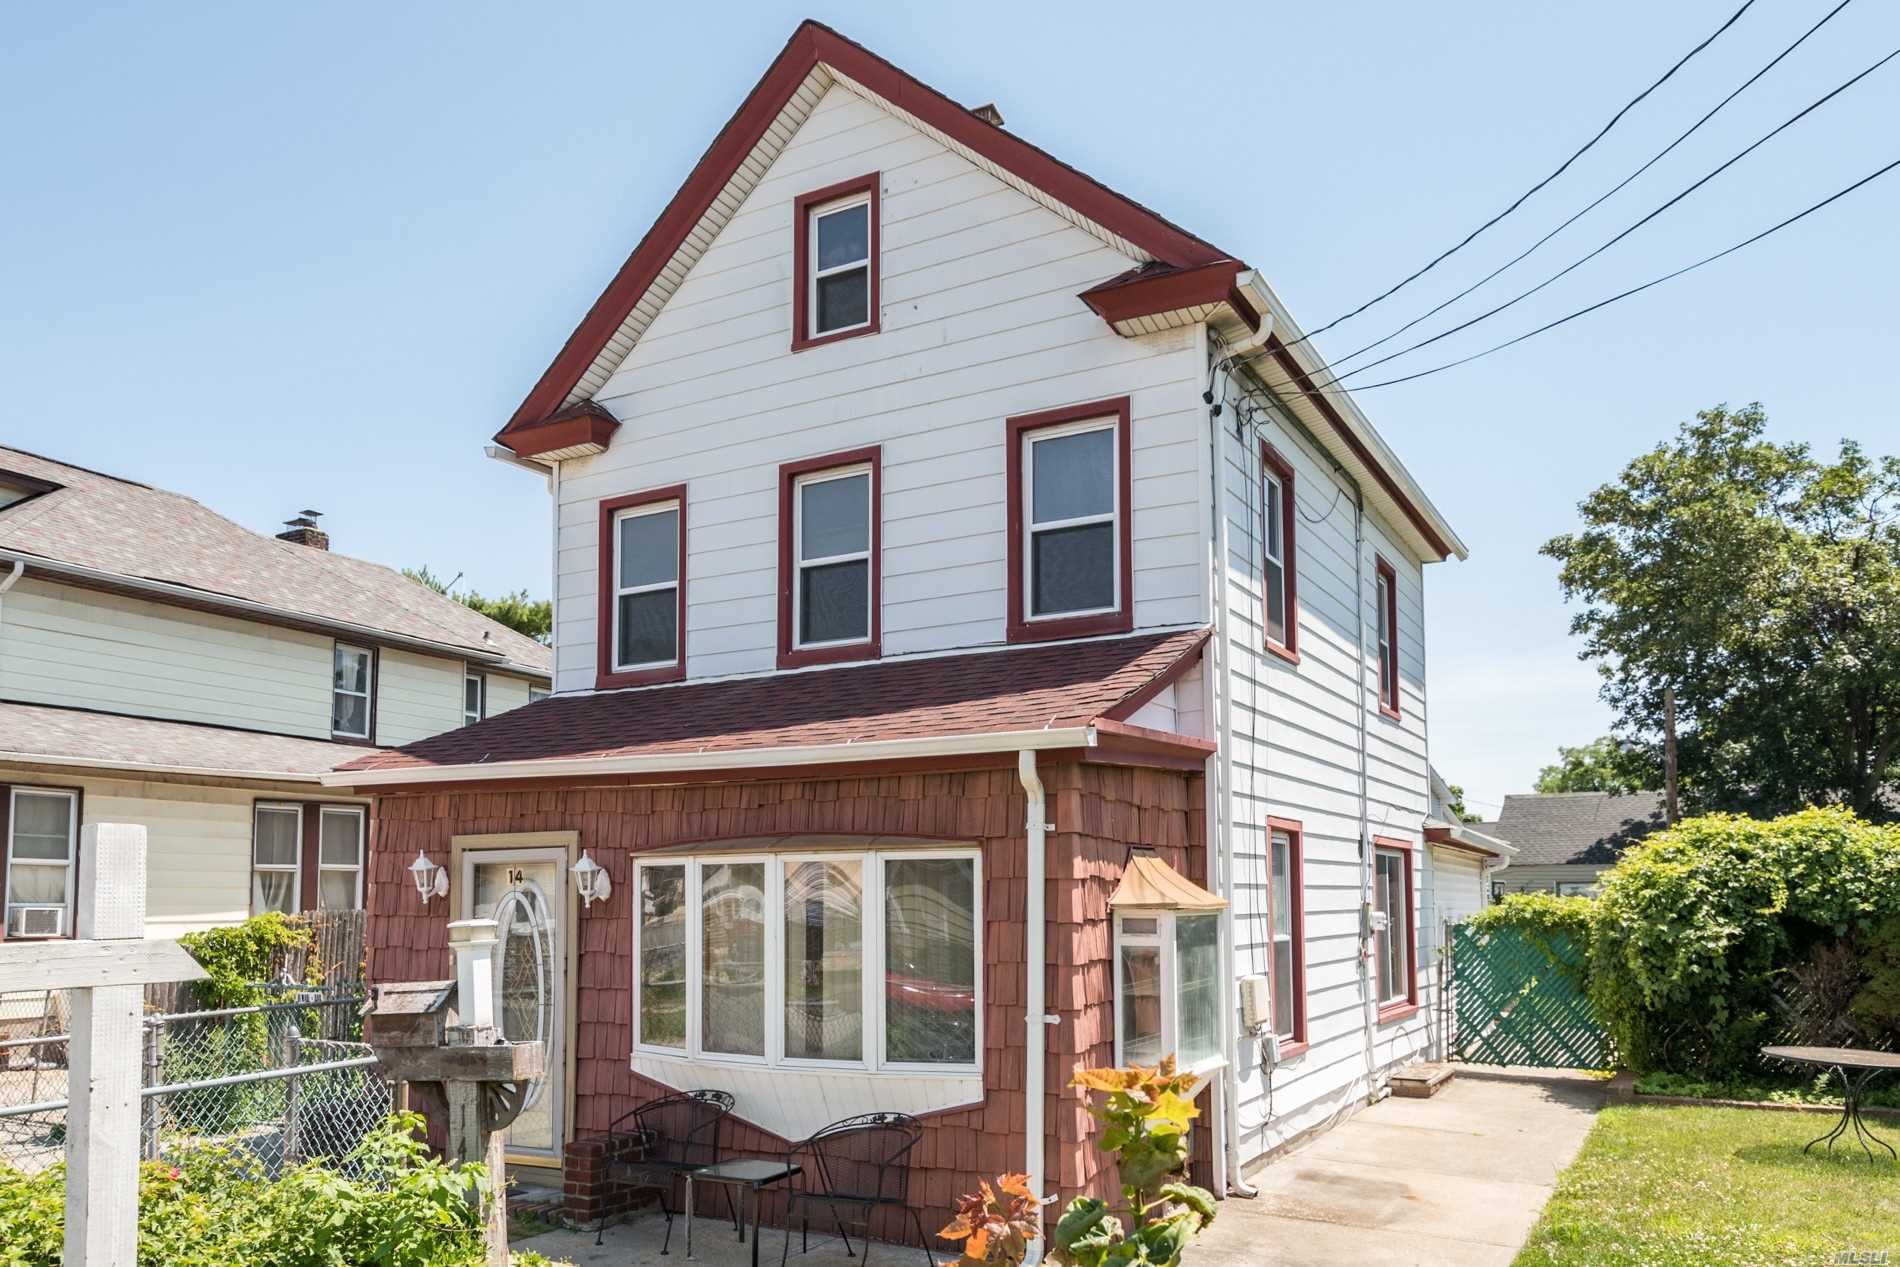 4 bedroom colonial with a walk up attic in the heart of inwood close to all !!